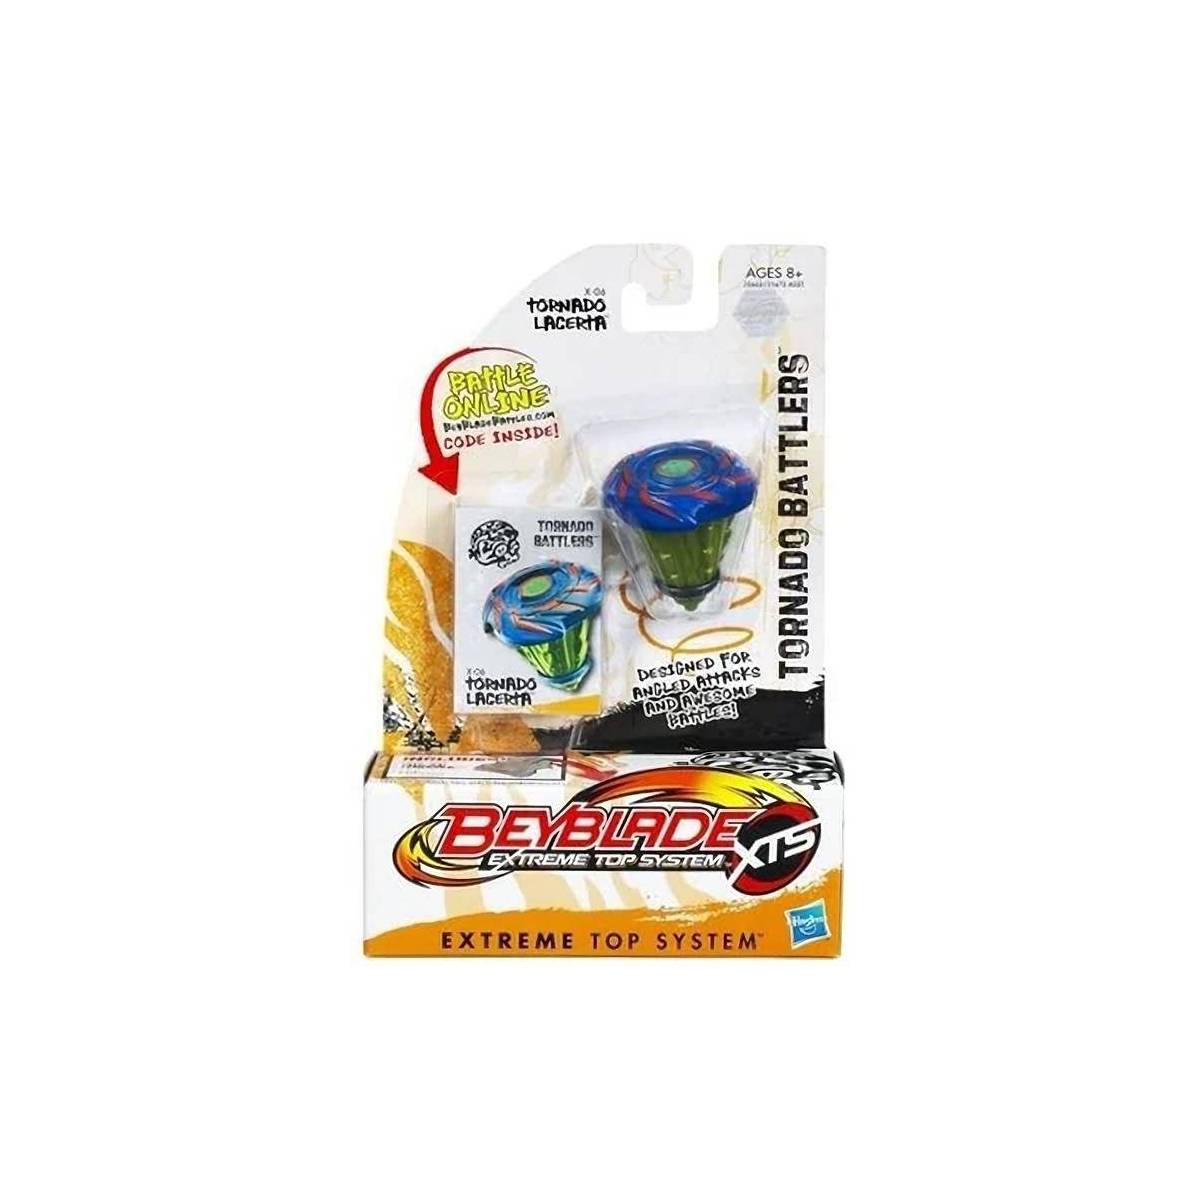 Beyblade Extreme Top System Tornado Lacerta X-06 Peonza